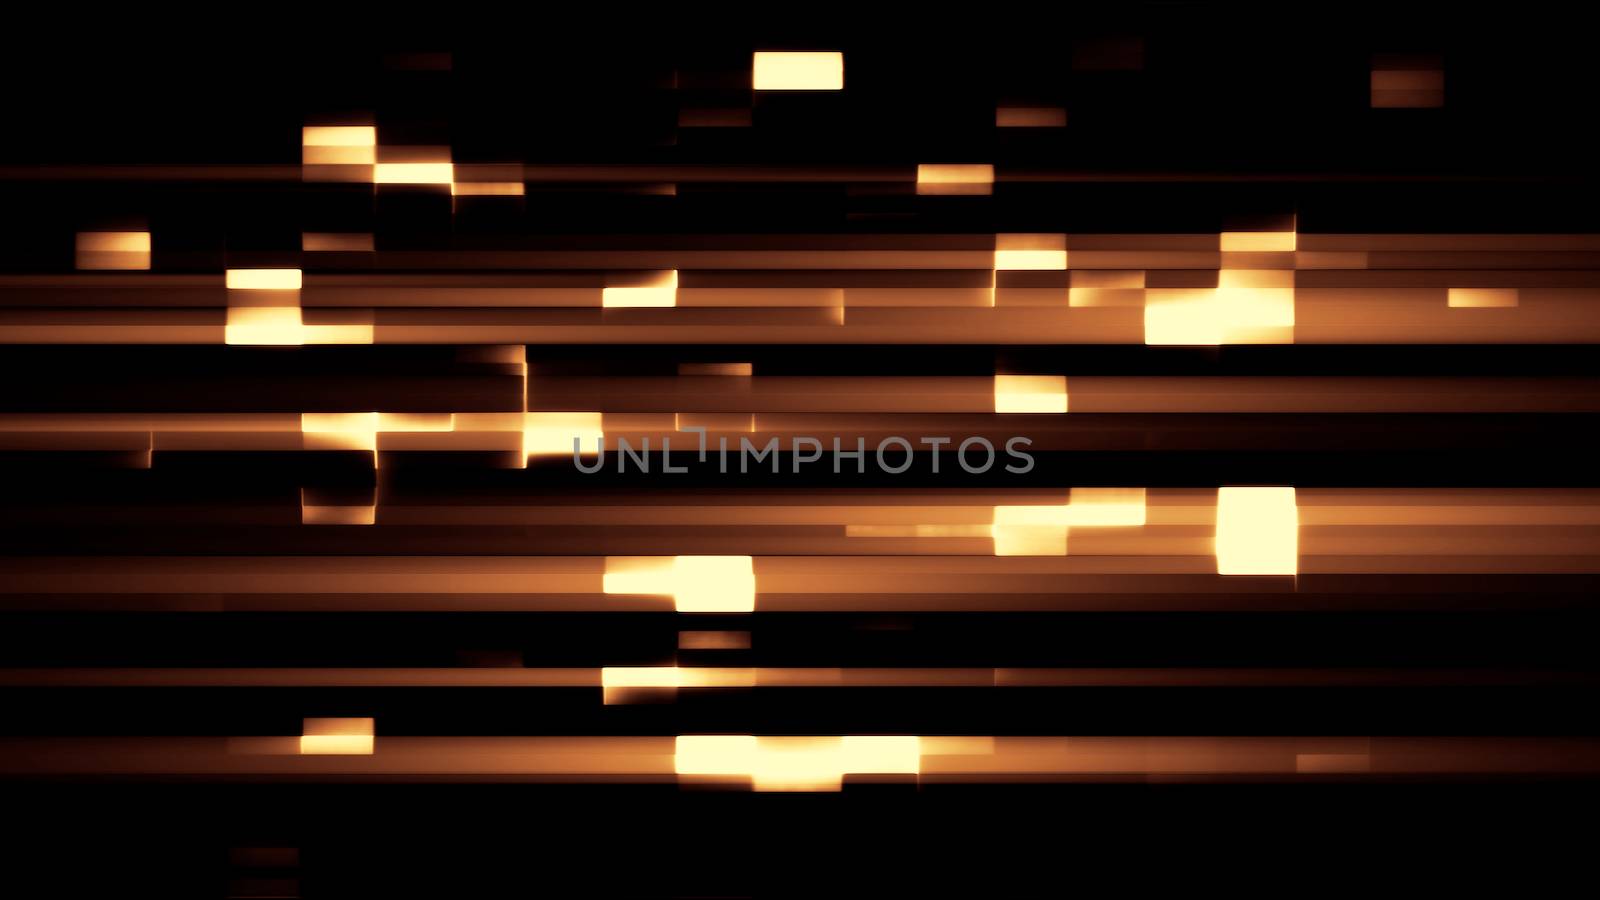 Future Tech 0293 - Futuristic technology abstract screen with digital noise and light effects.